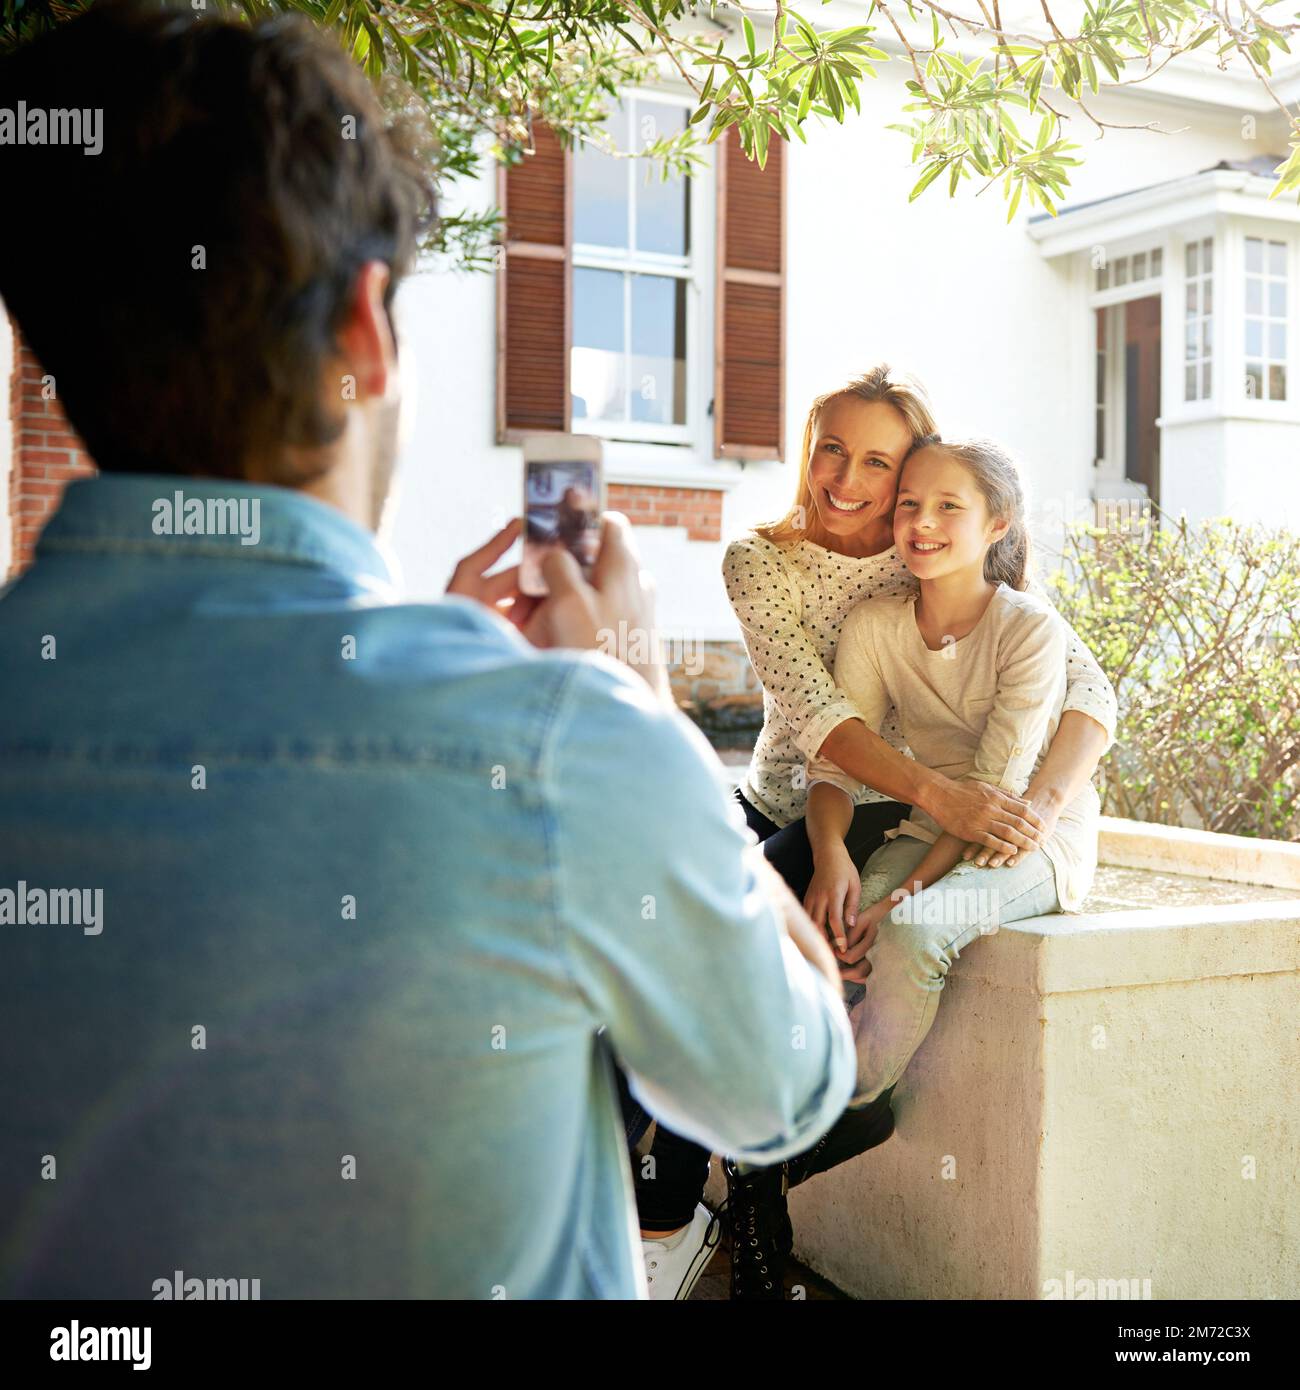 capture every moment. A man using his smartphone to take a photo of his family sitting outdoors. Stock Photo